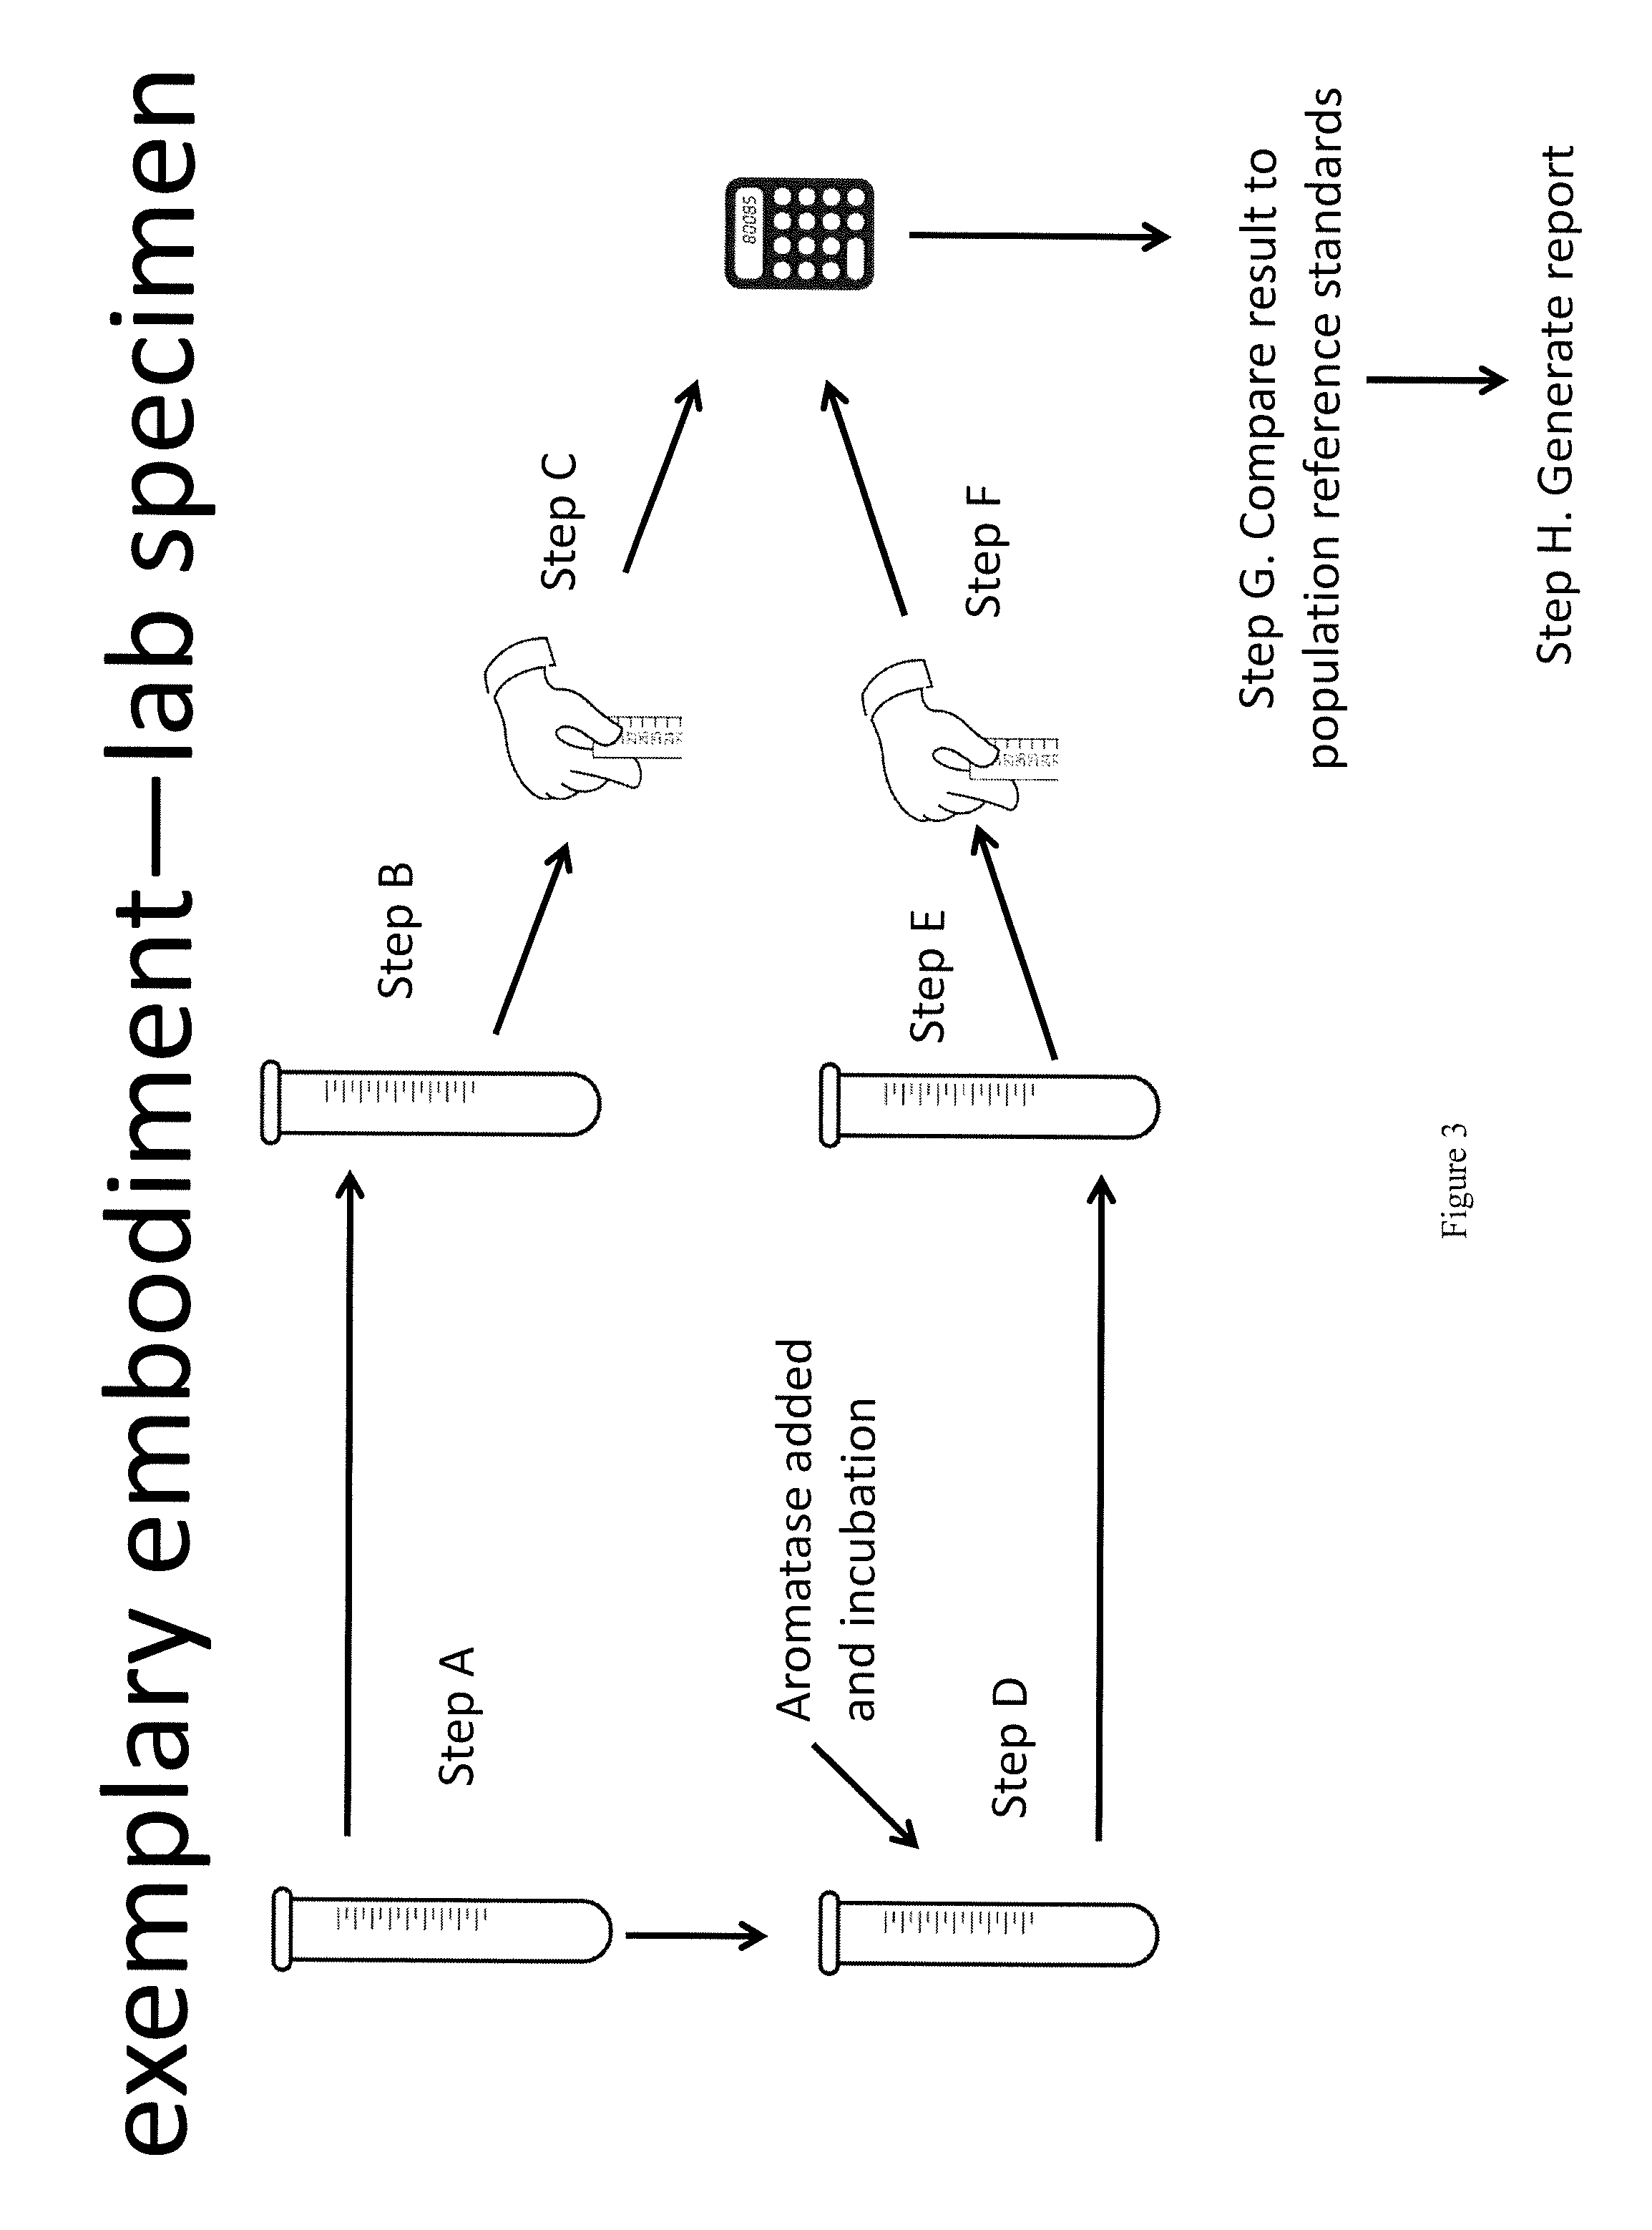 Method for measurement of bioavailable testosterone